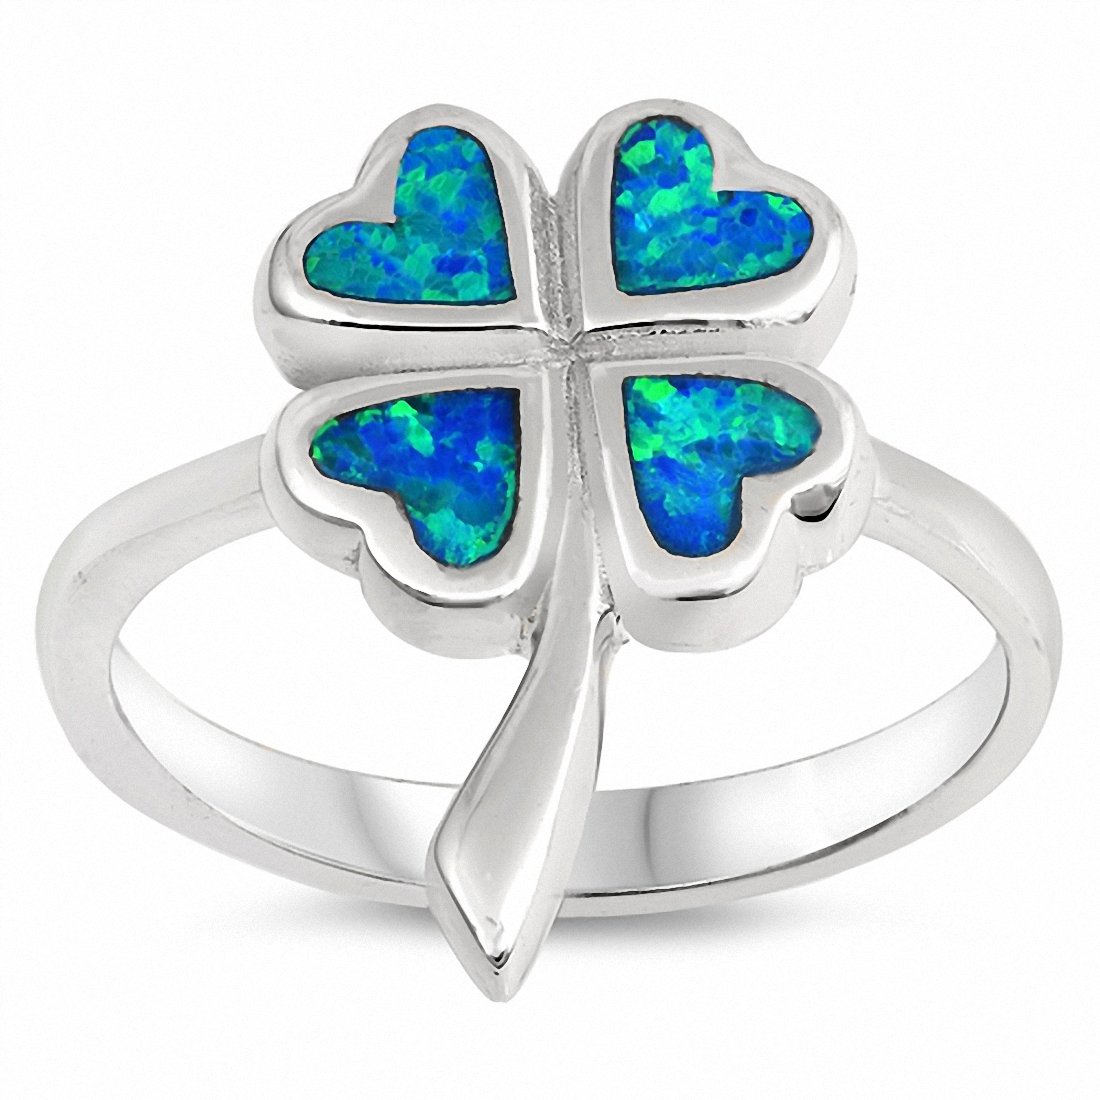 Clover Leaf Flower Ring Lab Created Opal 925 Sterling Silver